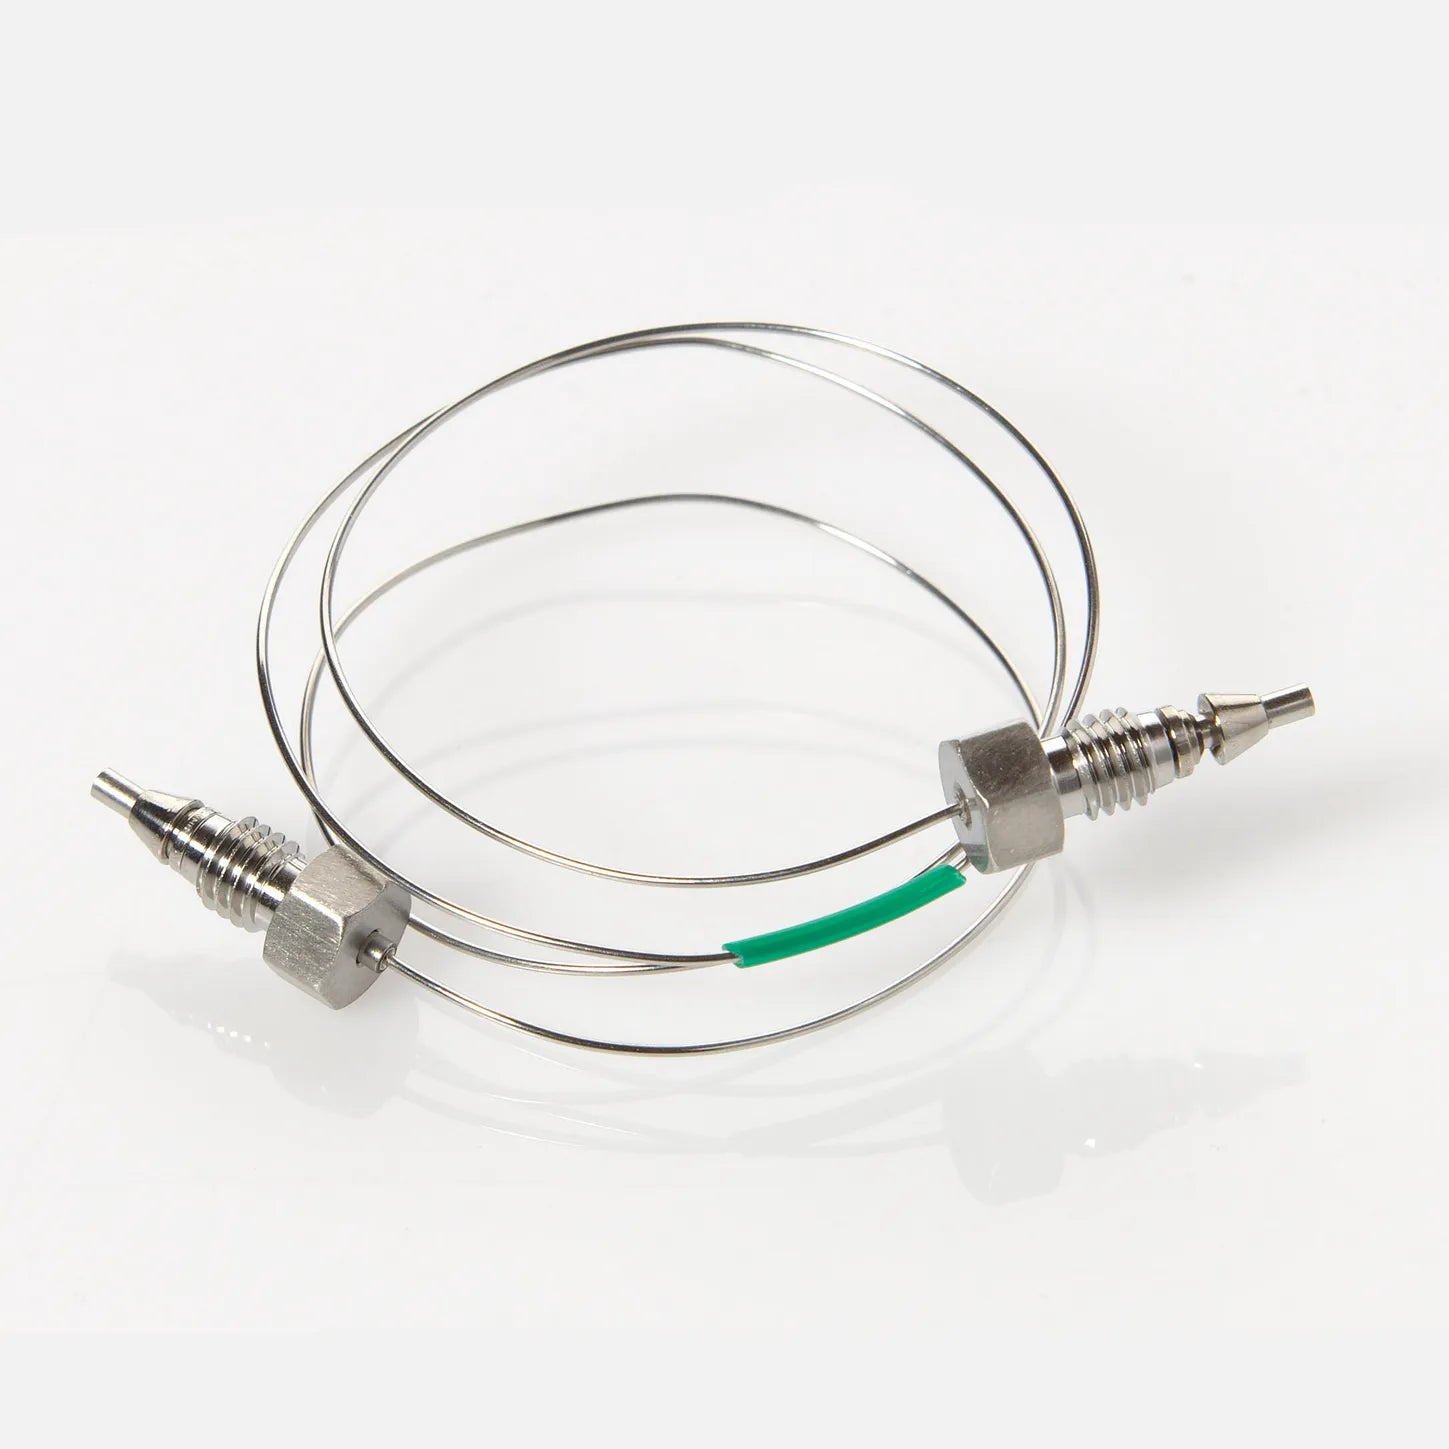 Assy, Capillary, 400mm x 0.17mm ID, w/Fittings, Comparable to Agilent # G1312-87303